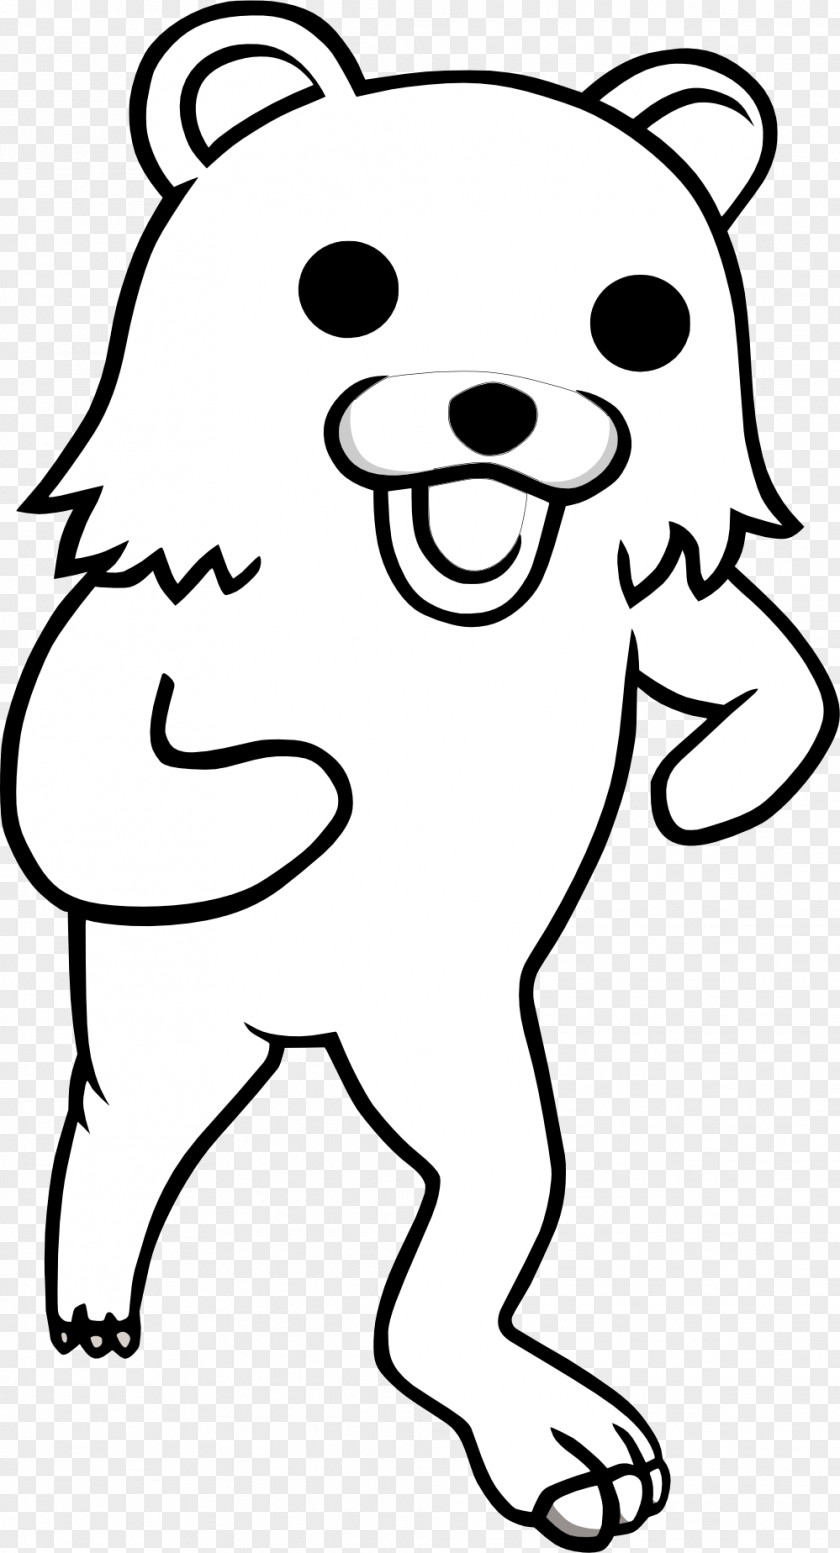 Black And White Line Art American Bear Domo Car Sticker PNG